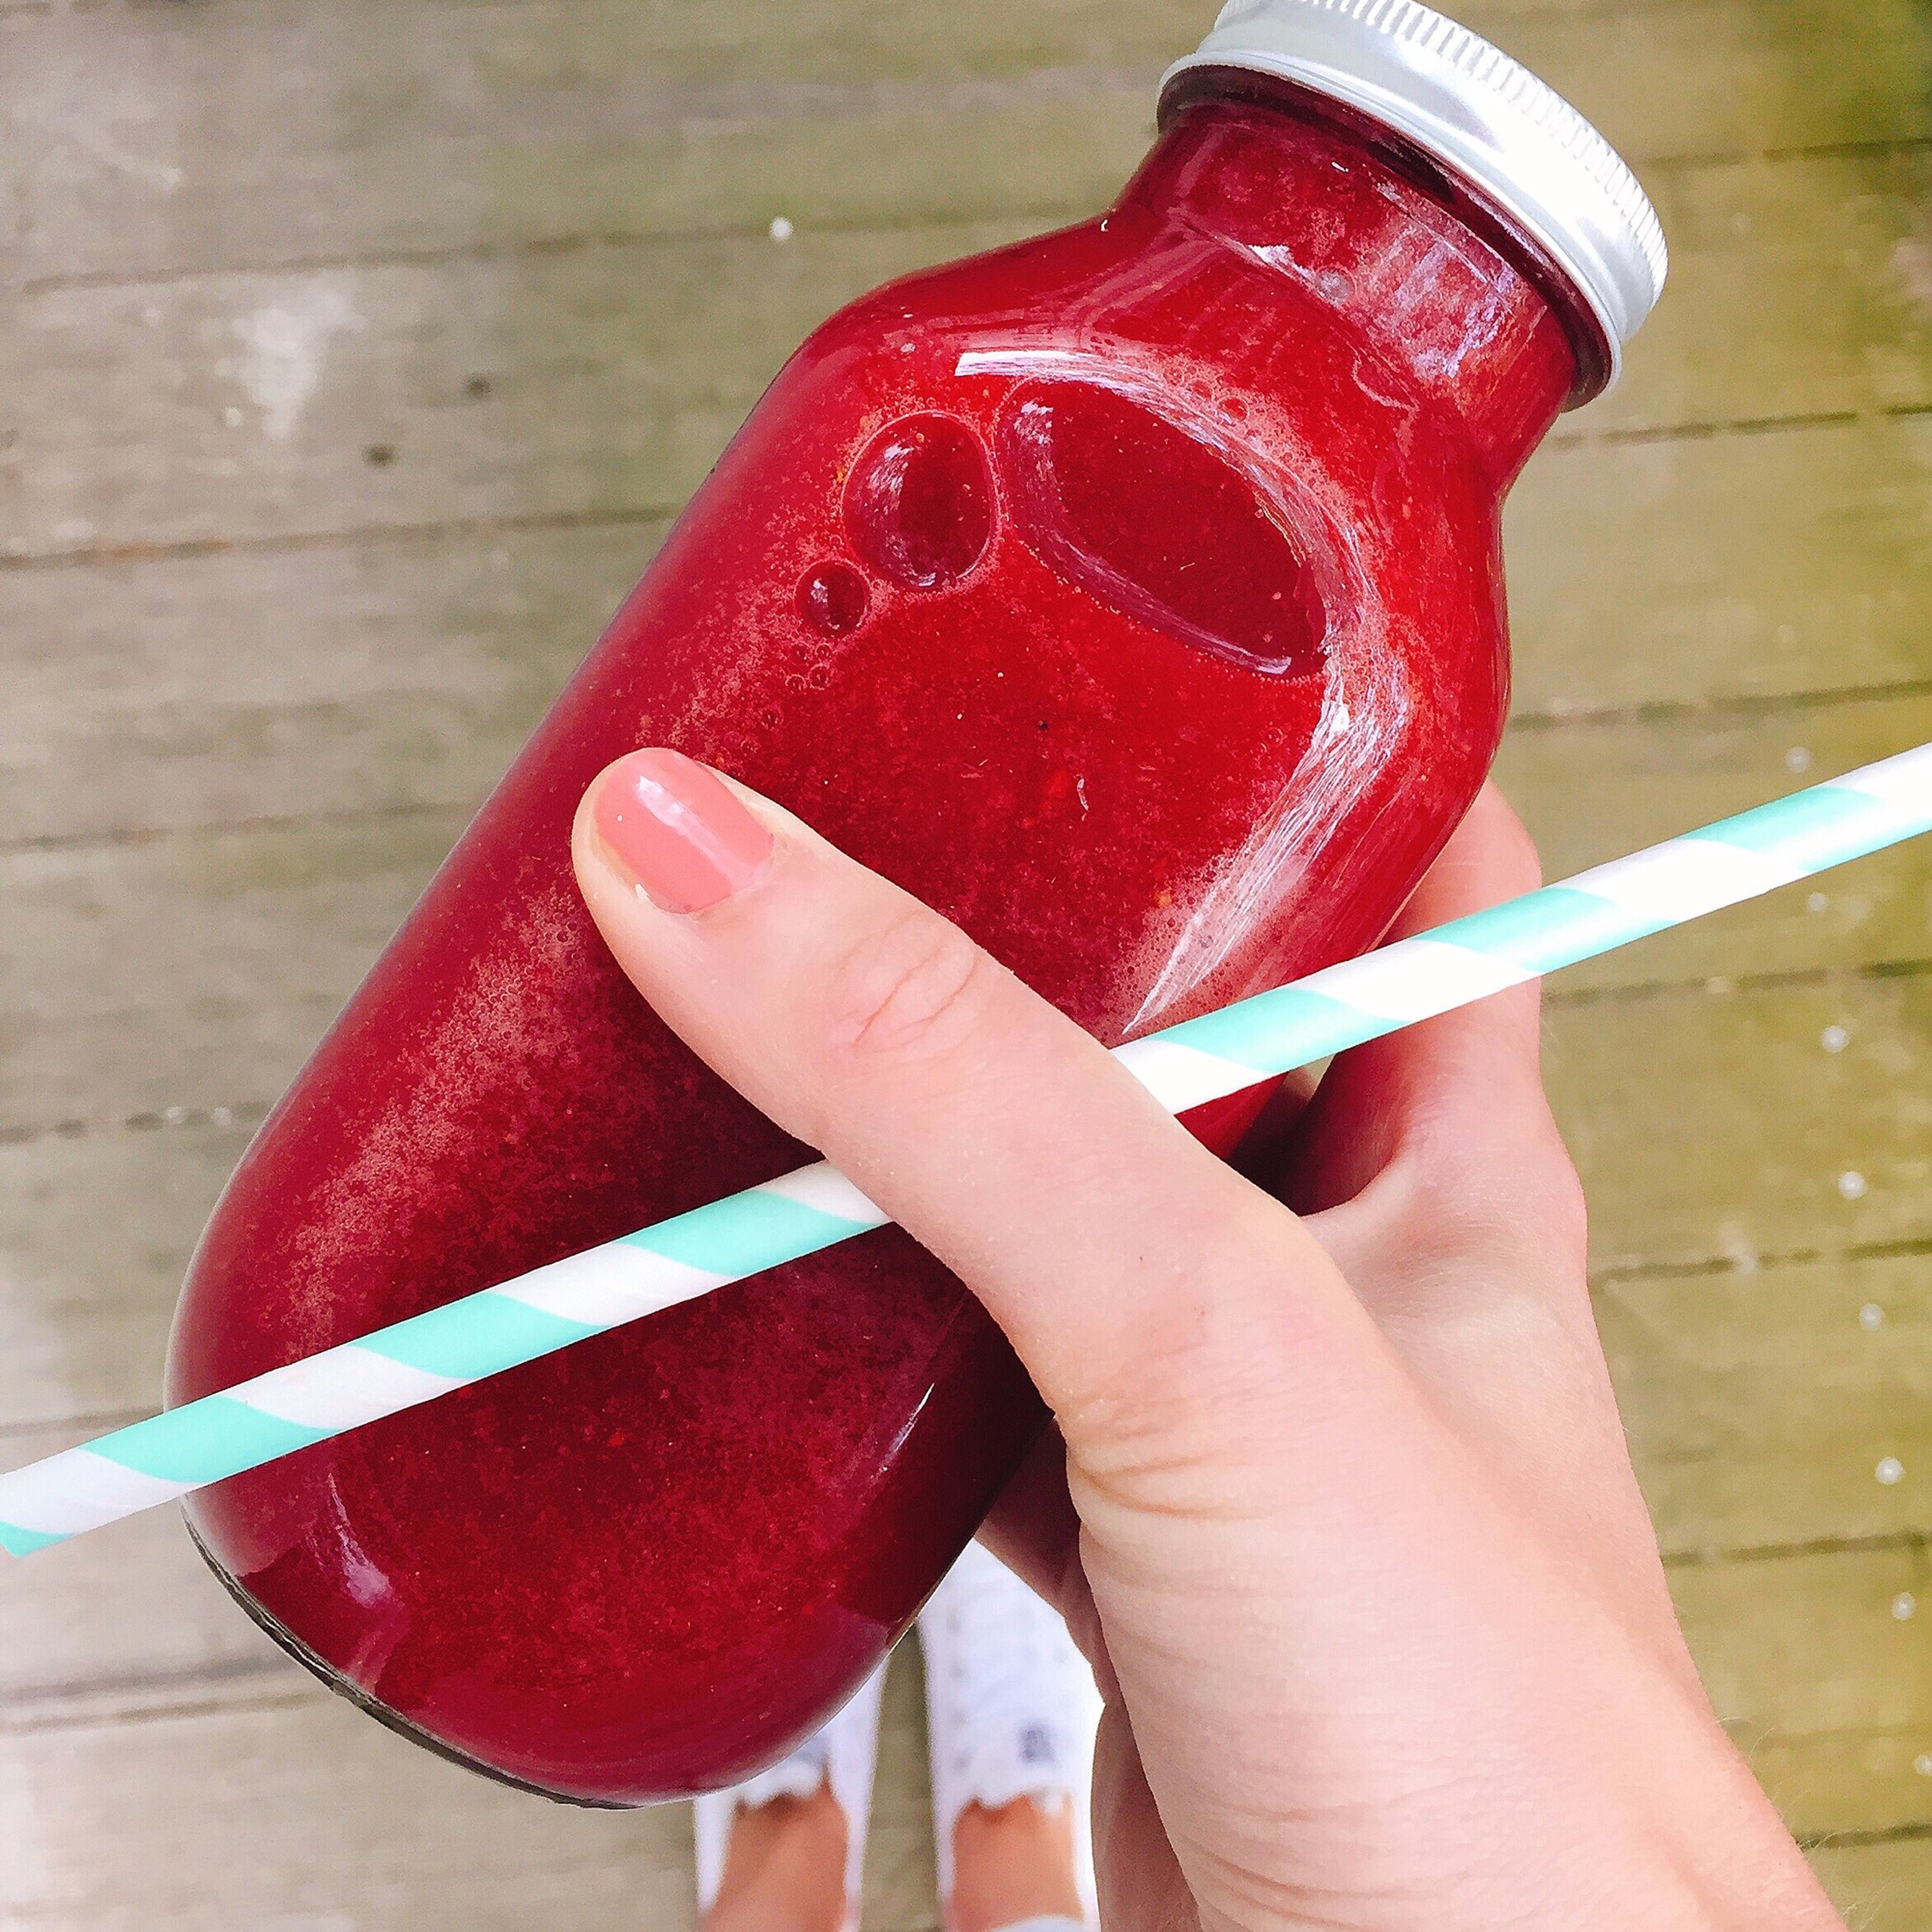 Glowing red smoothie